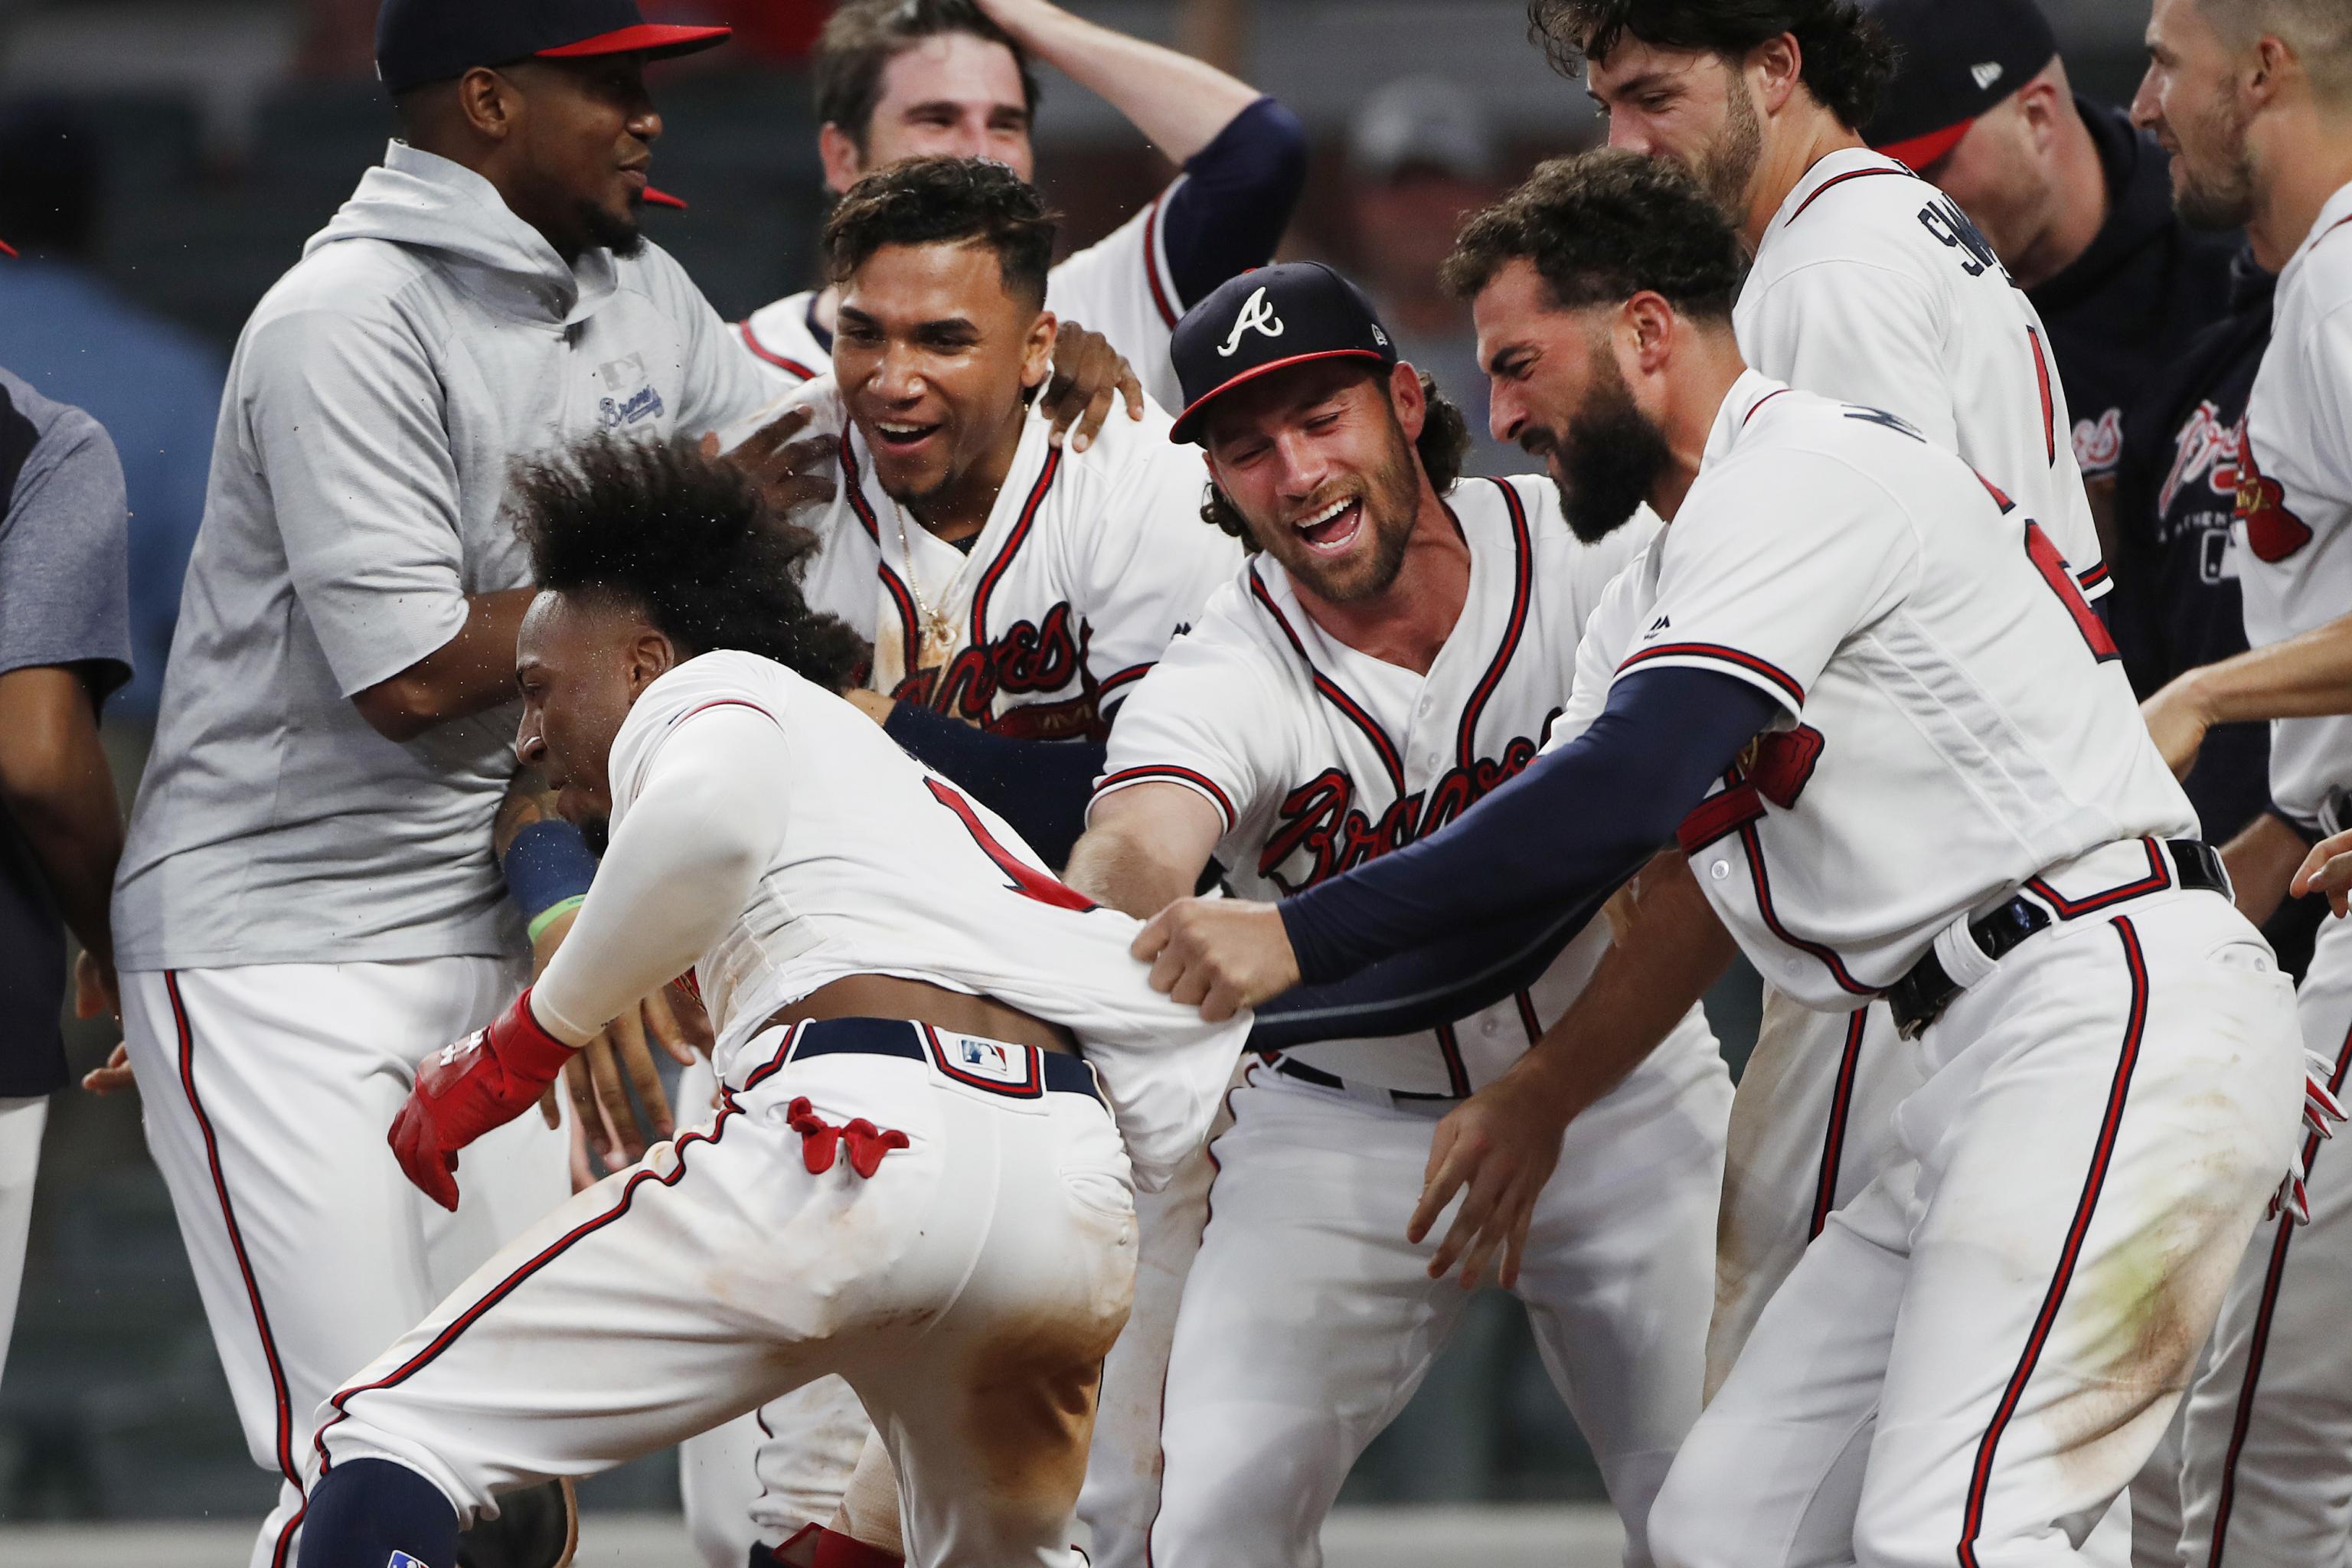 MLB on X: NL East, you've been chopped. The @Braves have